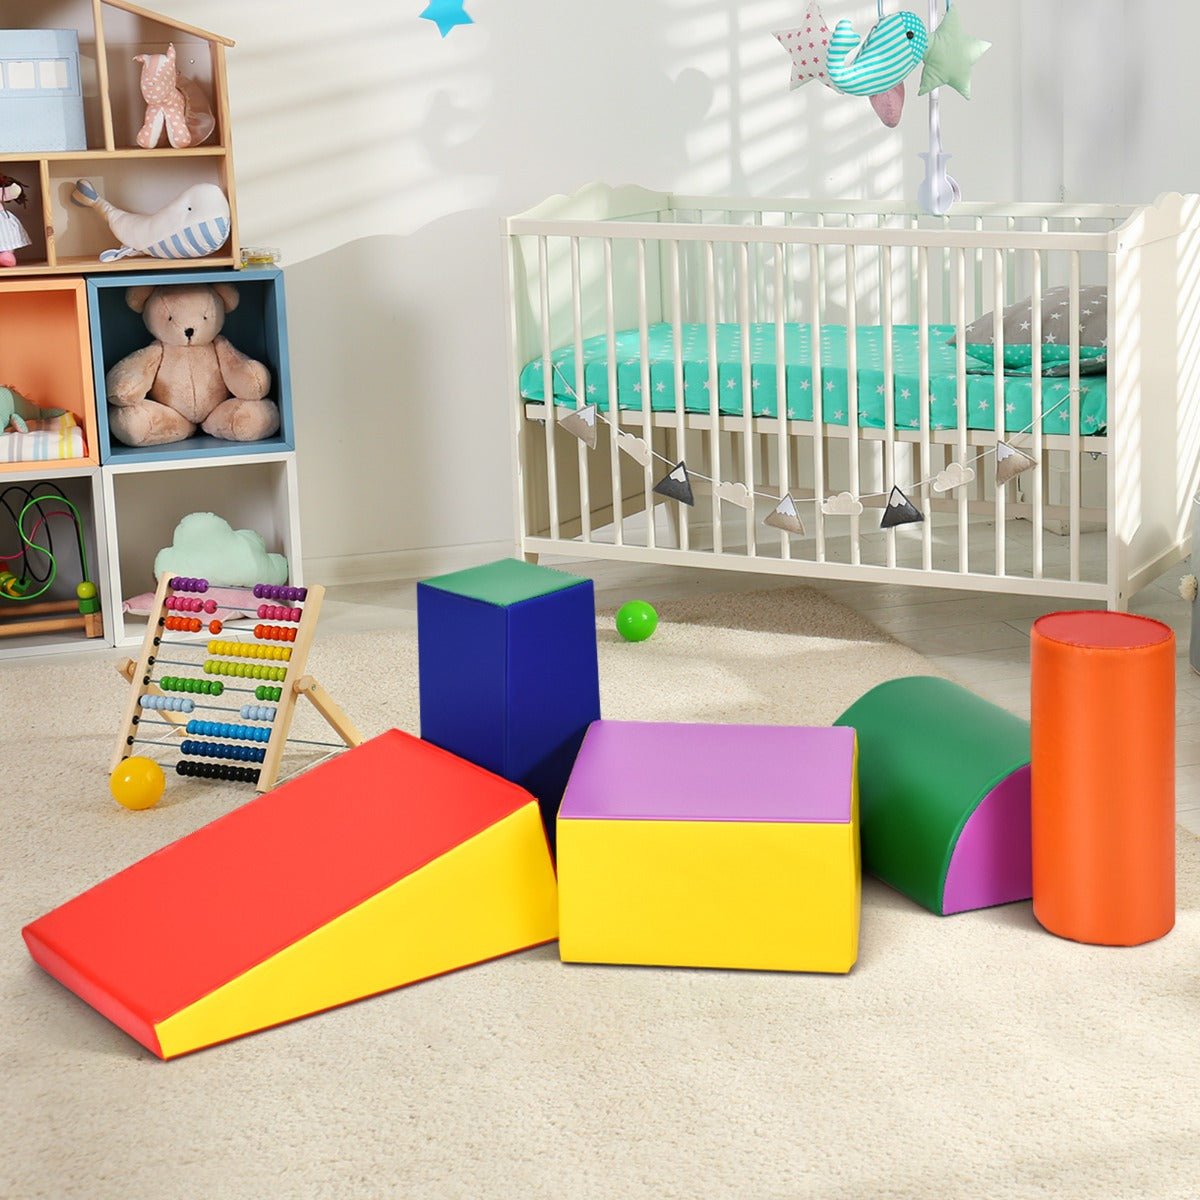 Adventure Awaits with Our Multicolour Foam Shapes Playset